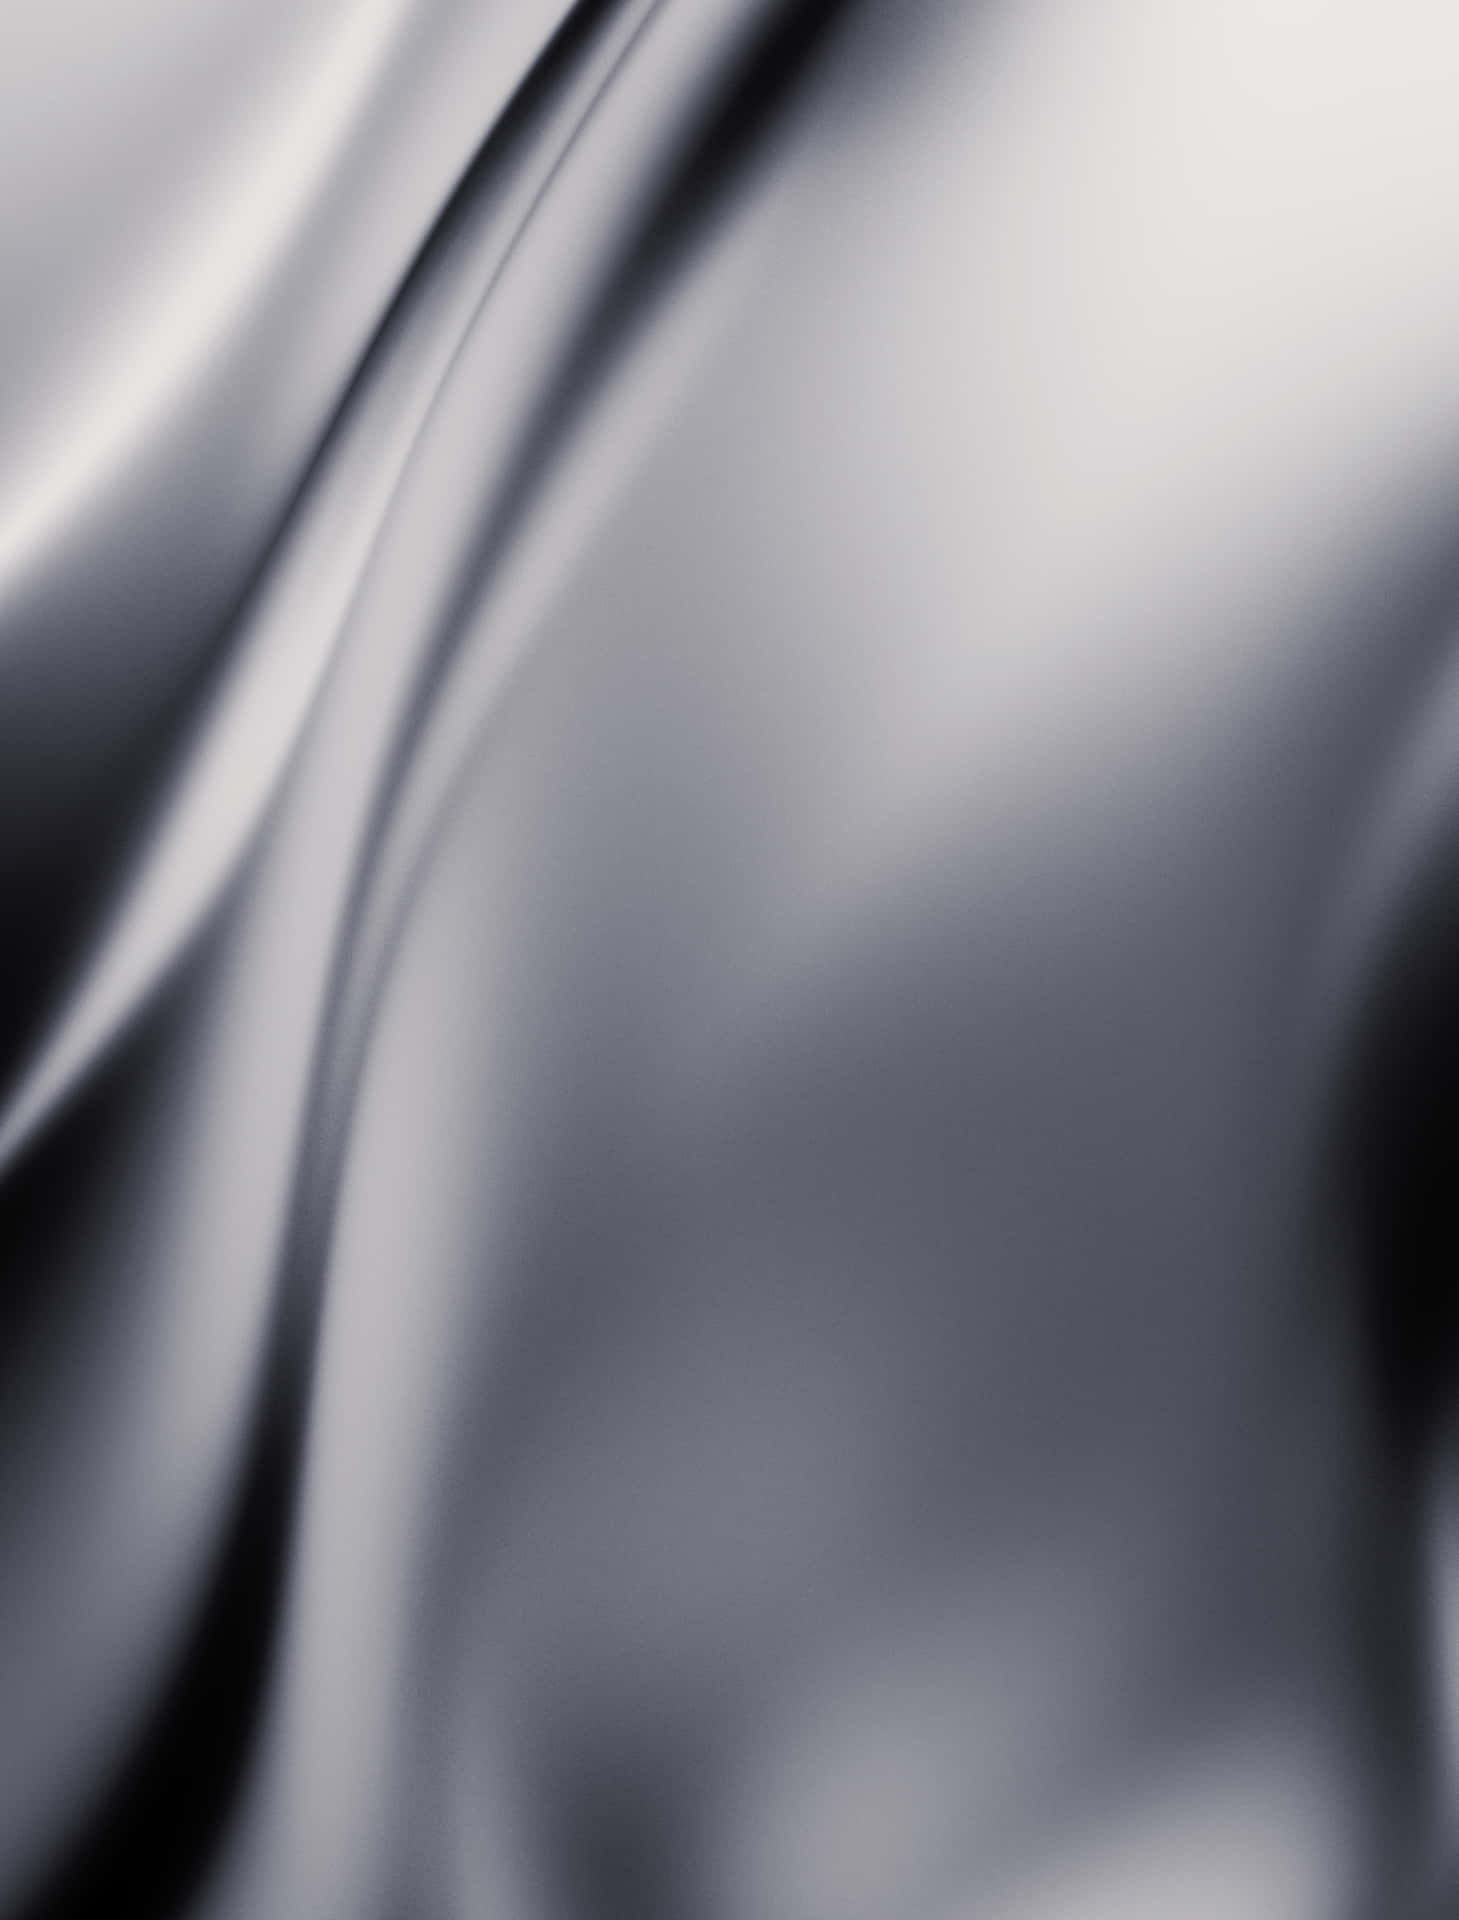 A Close Up Of A Black And Silver Silk Background